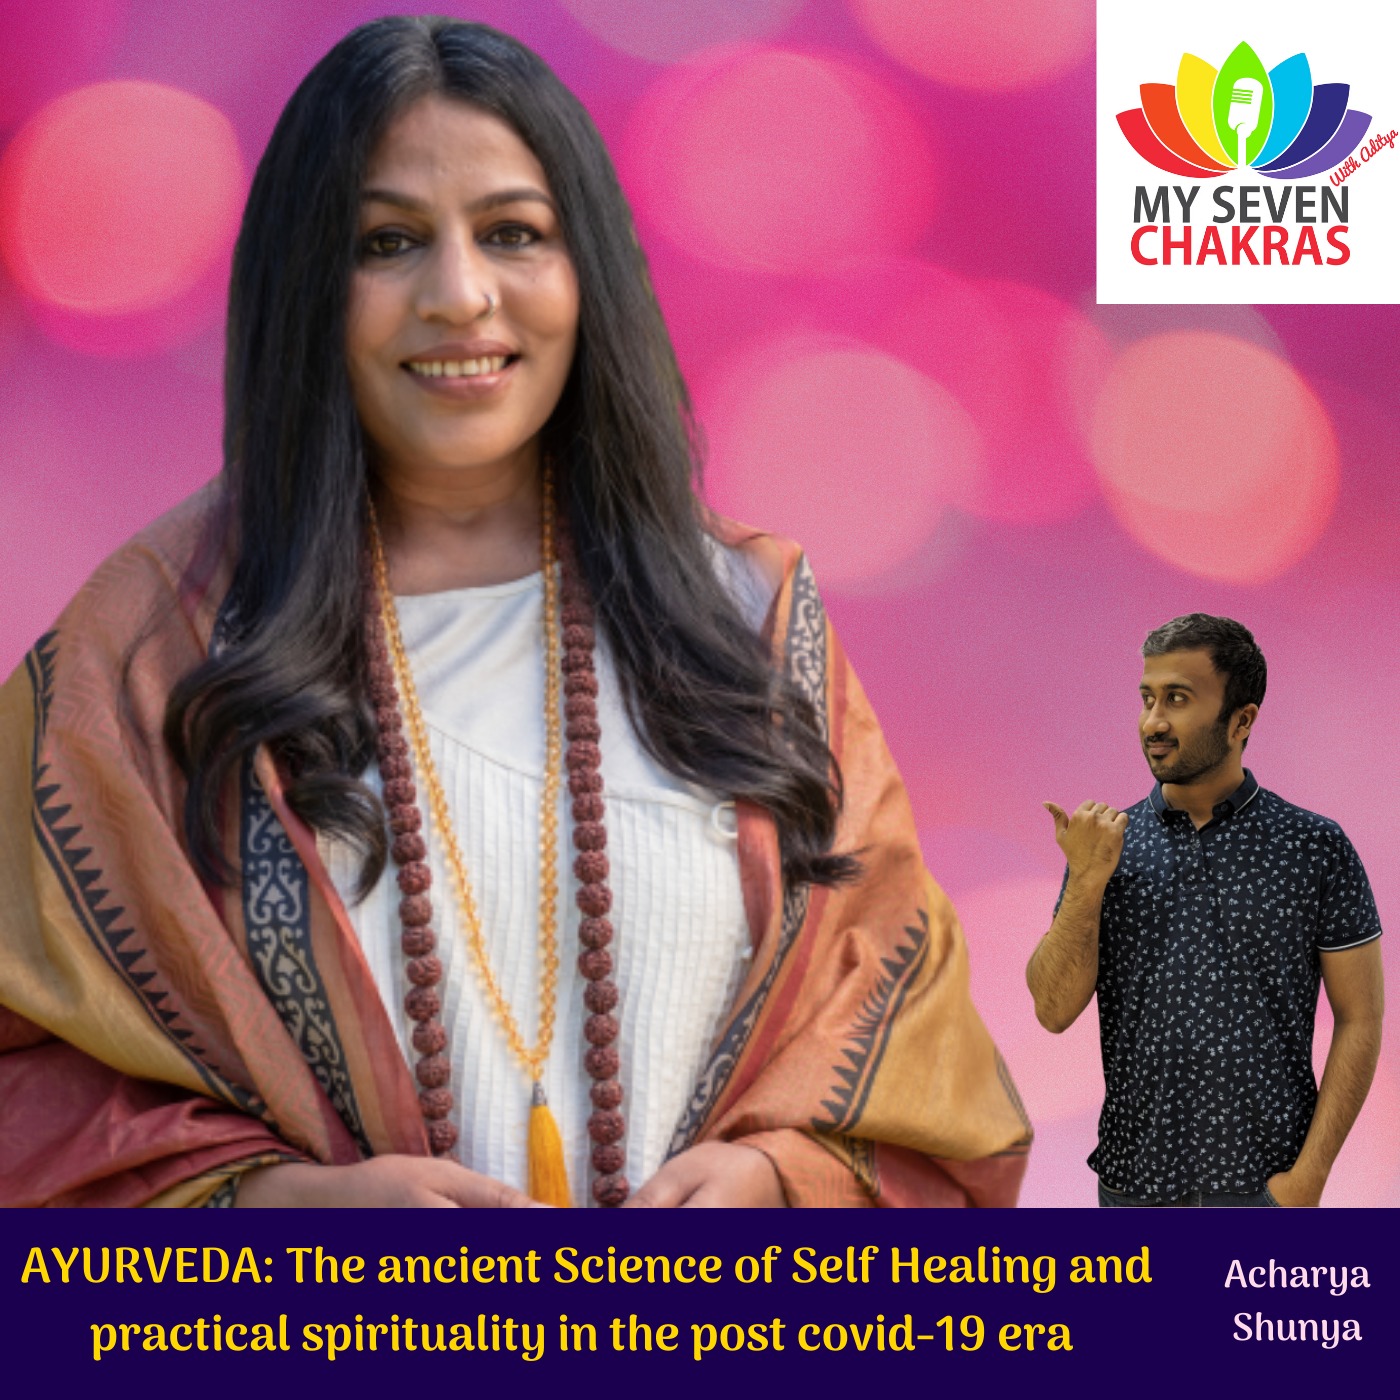 AYURVEDA: The ancient Science of Self Healing and practical spirituality in the post covid-19 era with Acharya Shunya